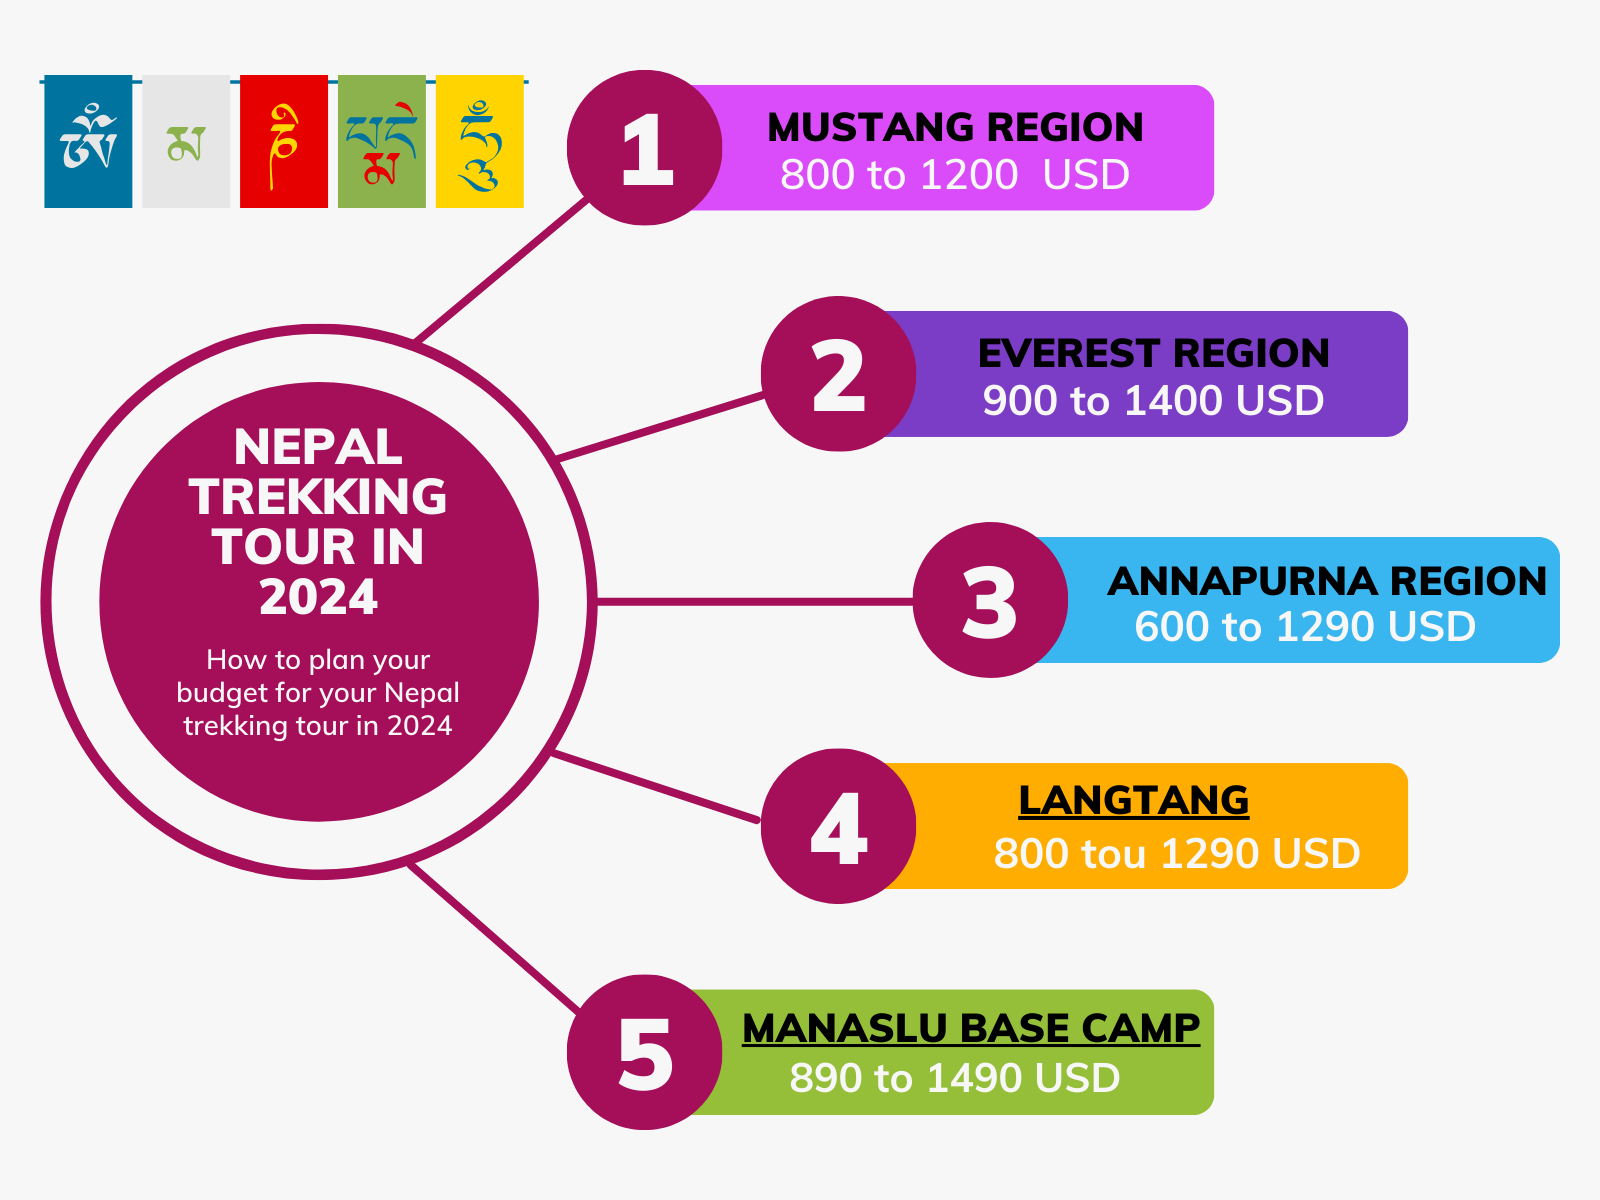 How to plan your budget for your Nepal trekking tour in 2024?